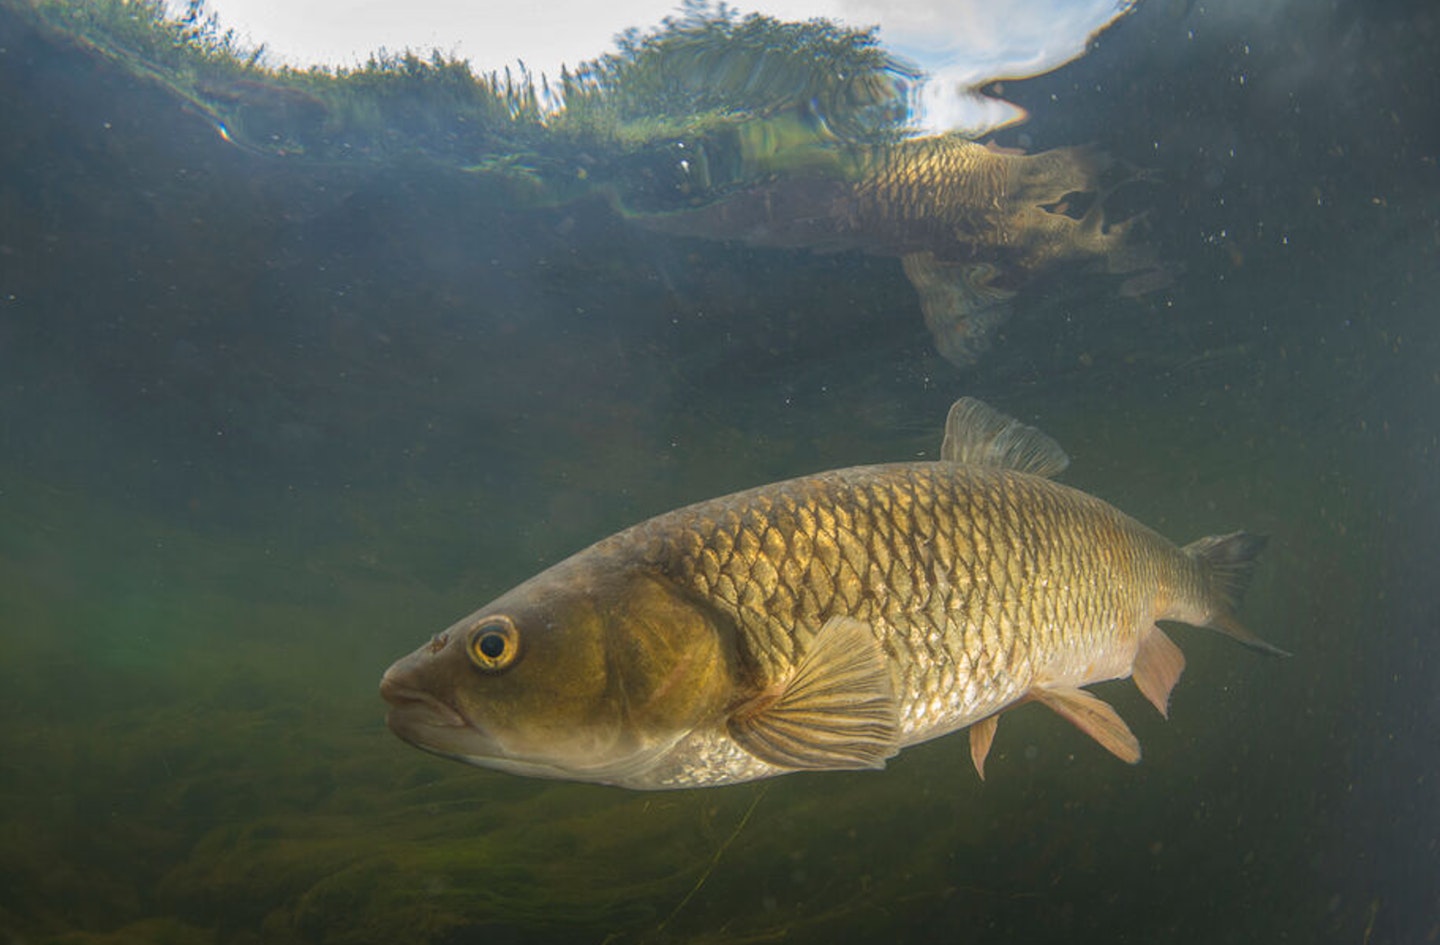 Where the main flow meets slower water is a productive area to target chub